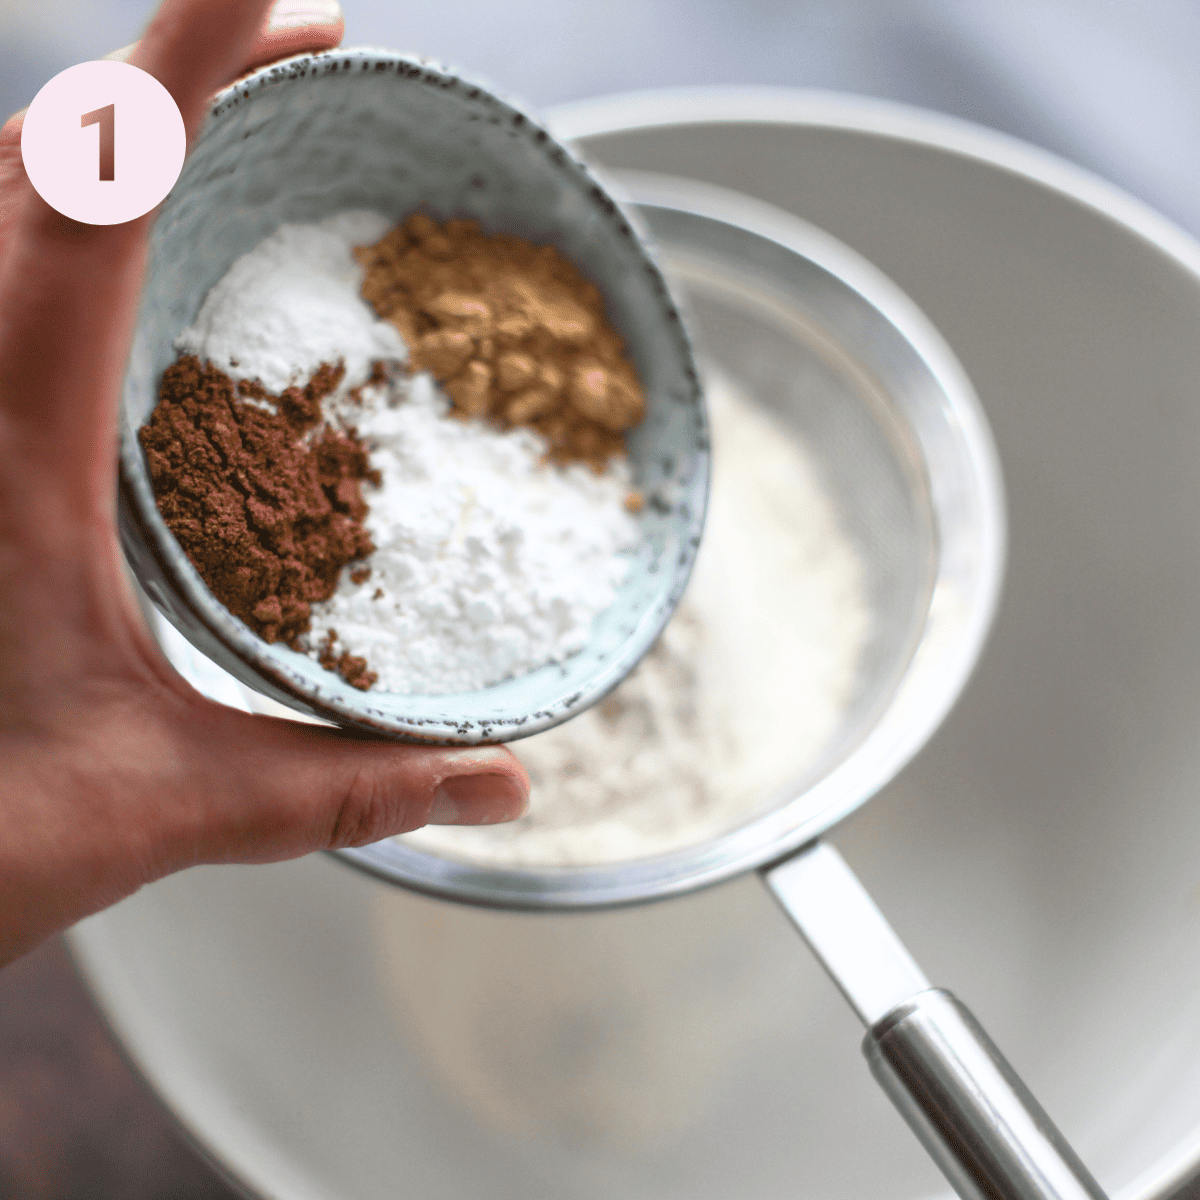 Sifting flour and spices into a bowl.